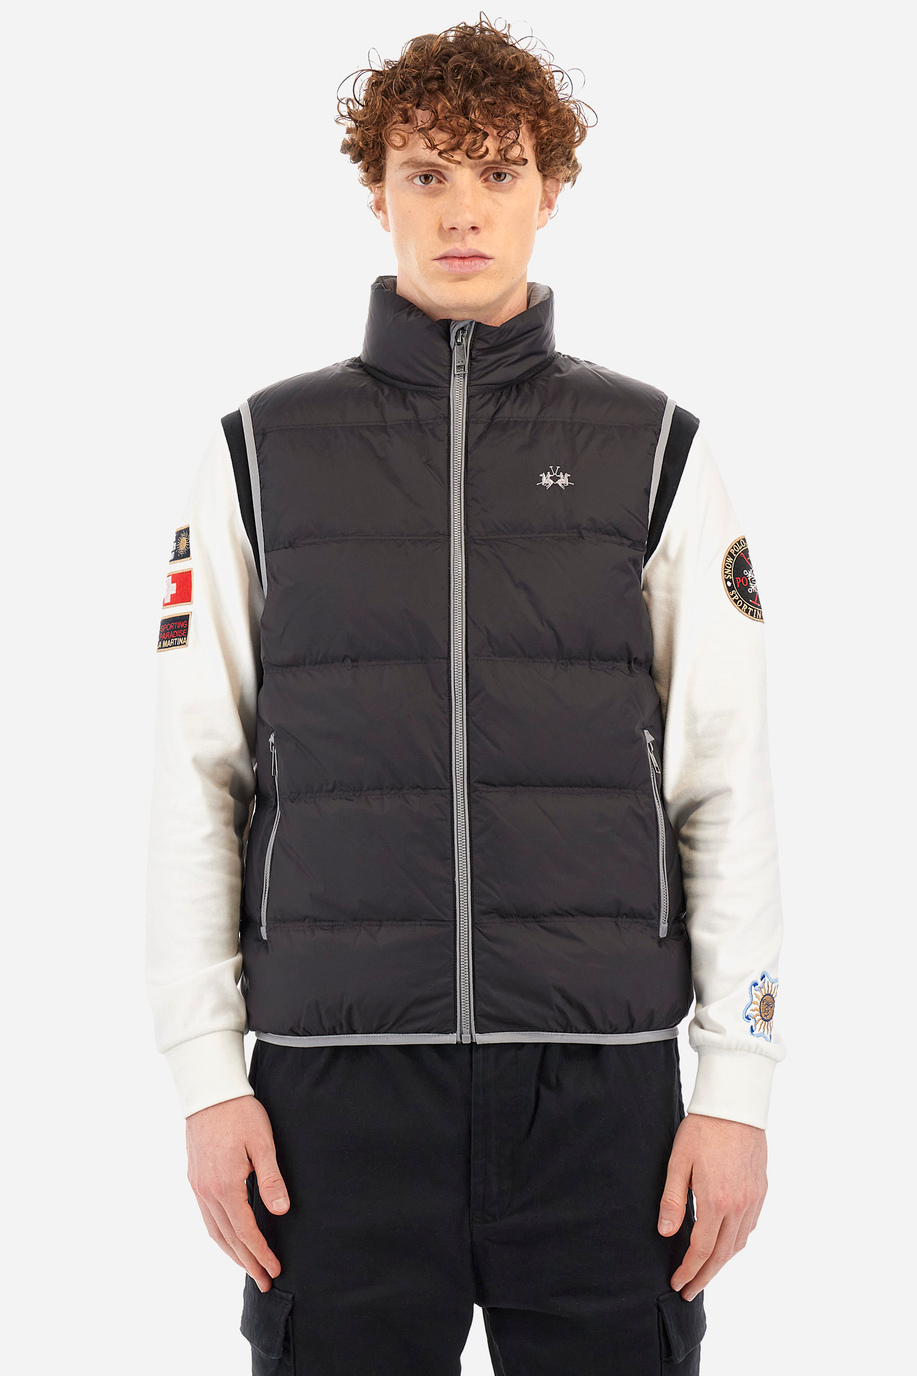 Man gilet in regular fit - Winniefred - Our favourites for him | La Martina - Official Online Shop